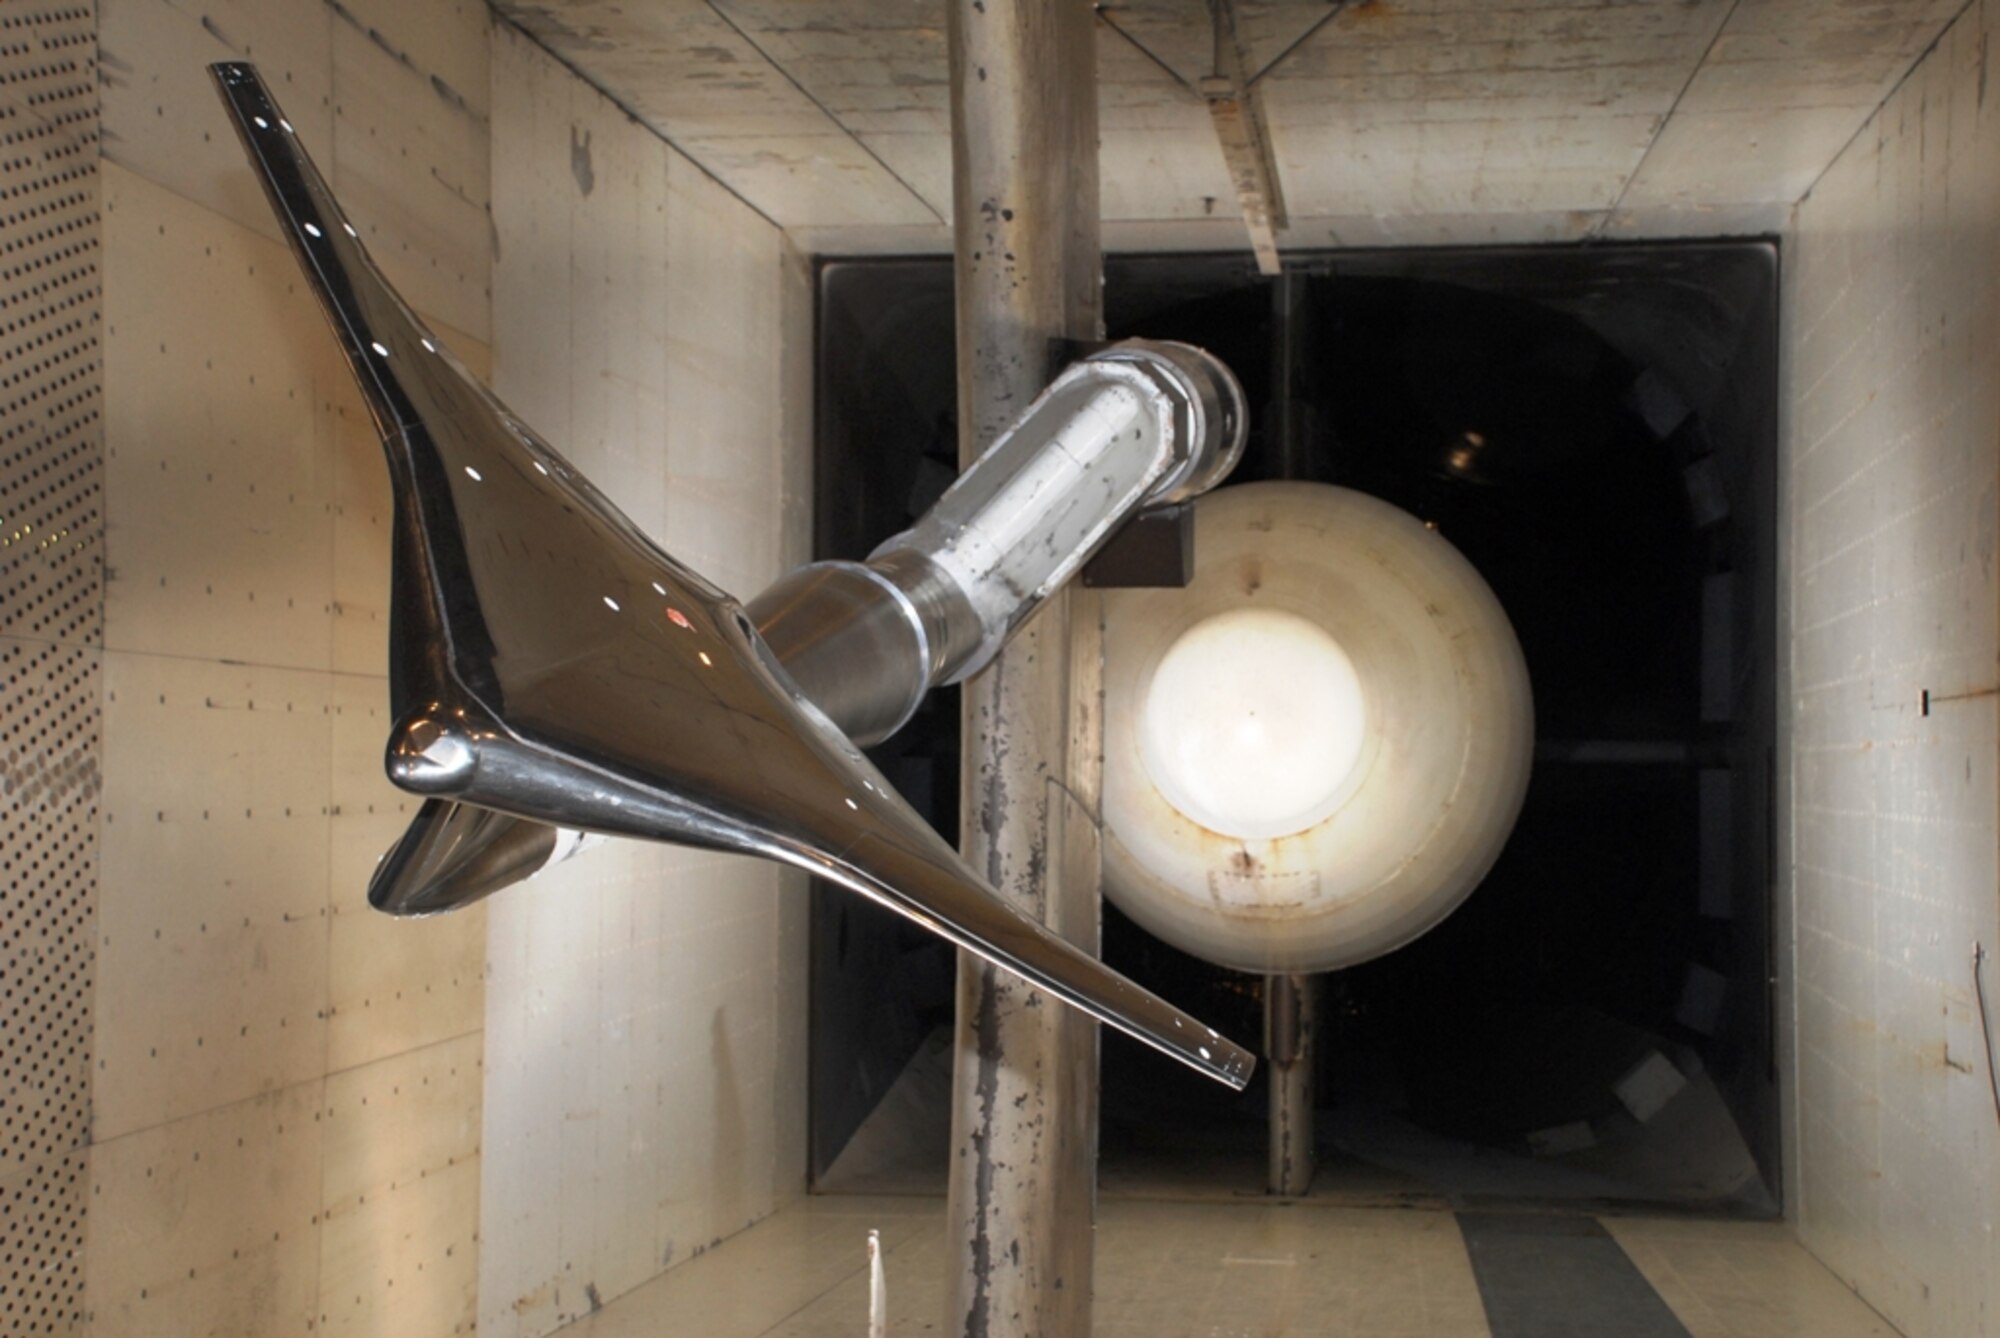 Arnold Engineering Development Center recently concluded aerodynamic tests on this two-percent model of the BWB aircraft in the center's 16-foot transonic wind tunnel, 